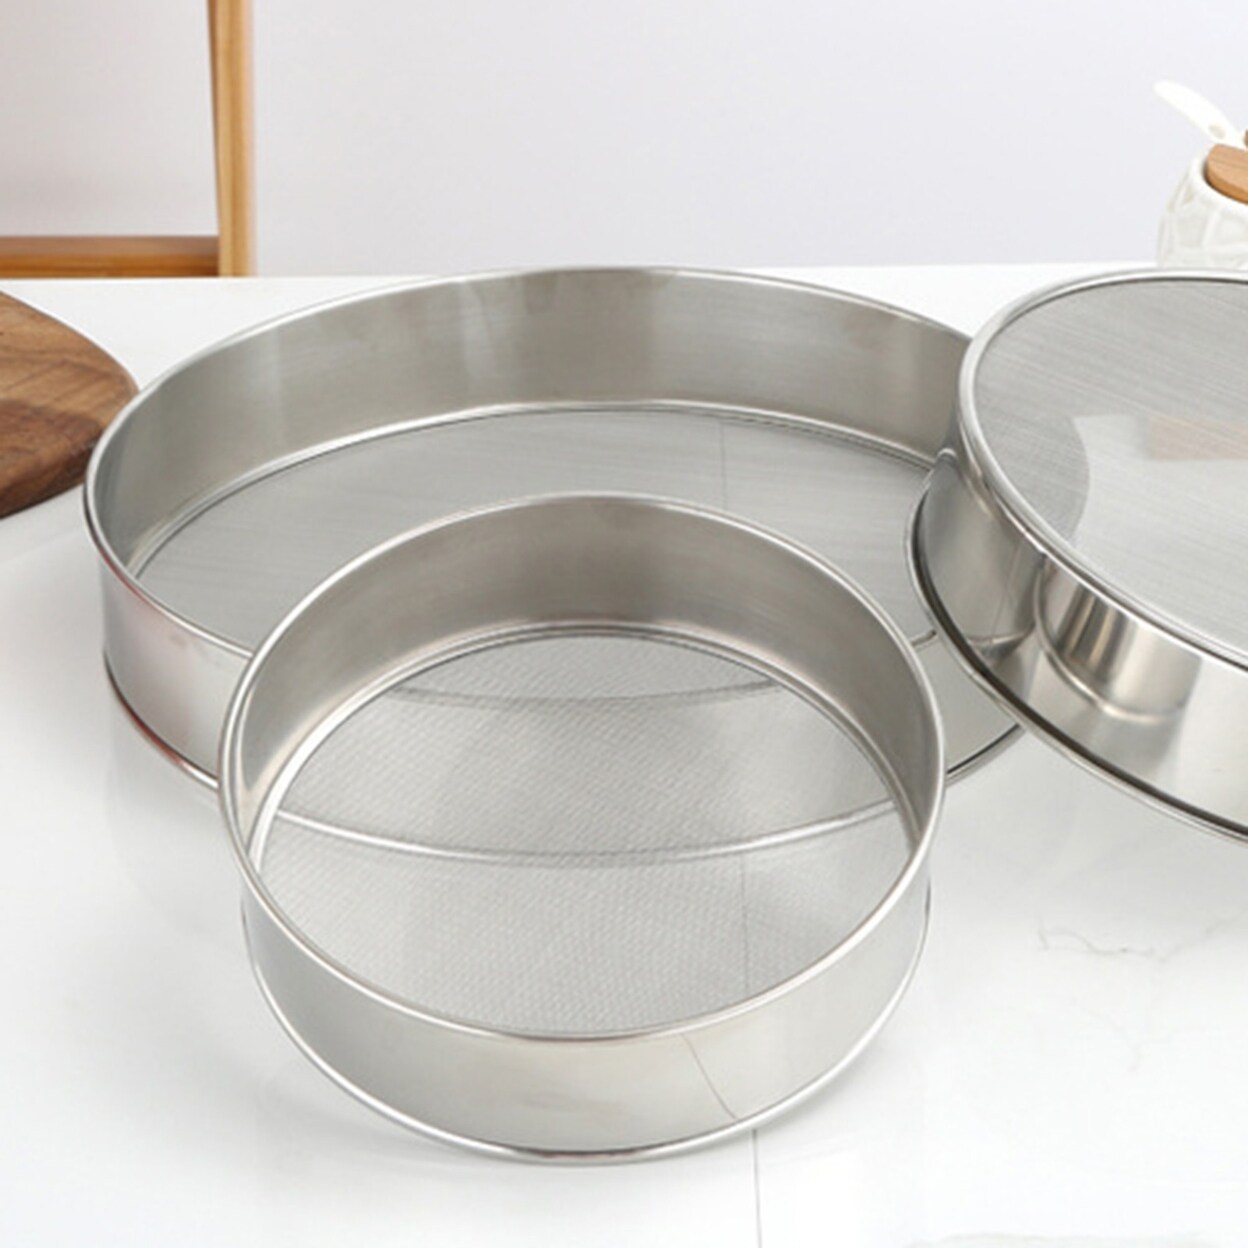 https://ak1.ostkcdn.com/images/products/is/images/direct/17473dbdf420020b38d628e5cf25fdf9a6696c1a/Flour-Sieve-RustProof-MultiFunctional-Stainless-Steel-Baking-Cooking-Flour-Mesh-Sifter-Household-Supplies.jpg